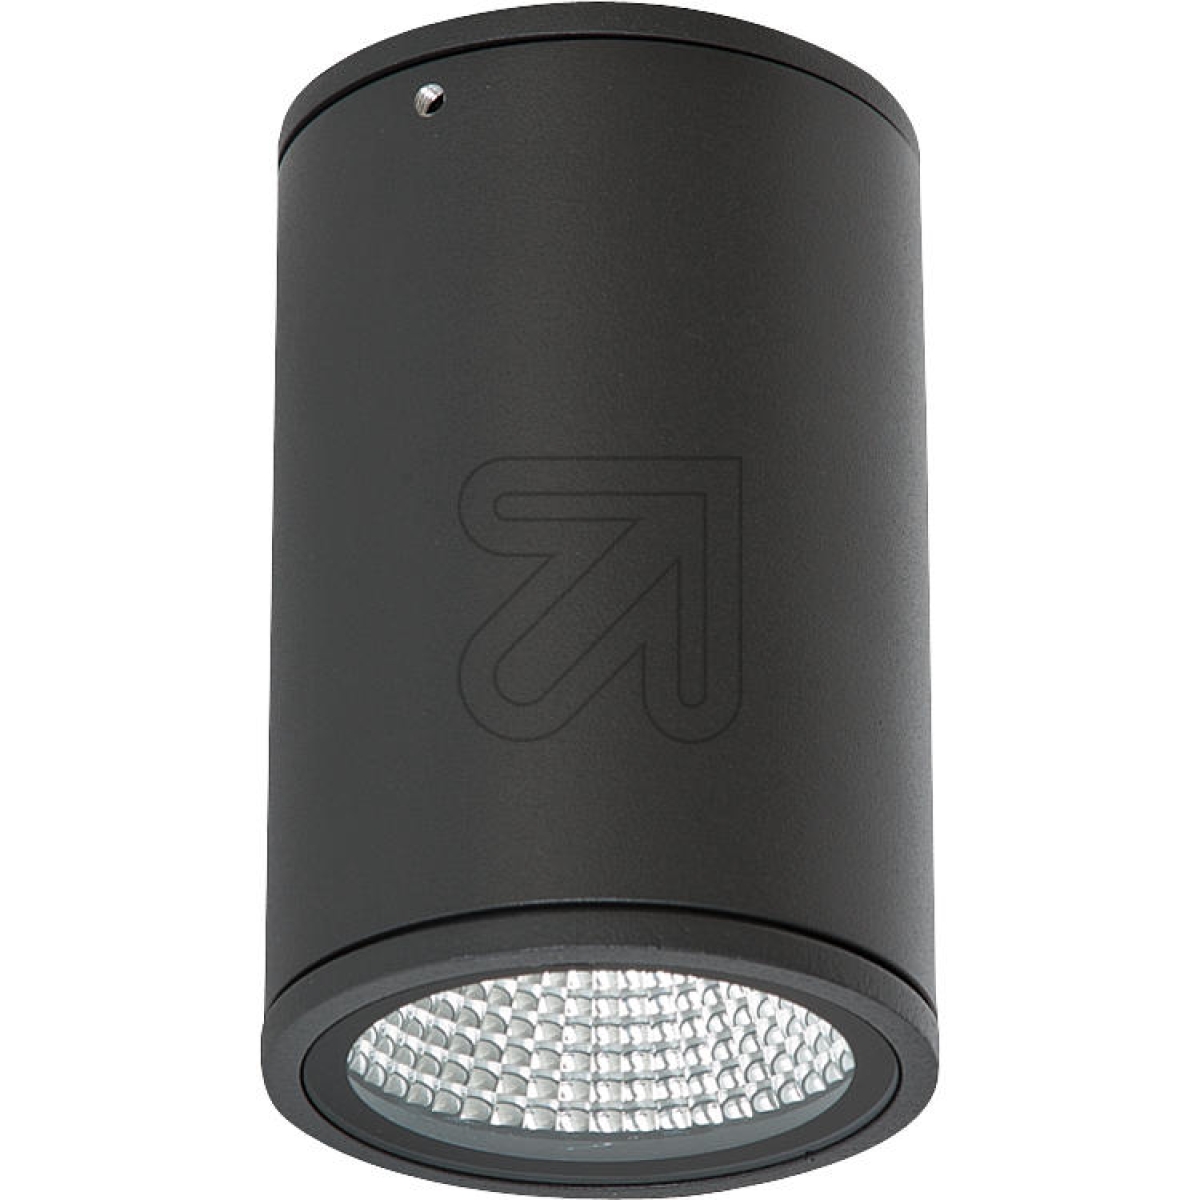 EVNLED outdoor light anthracite 12W 3000K C541511202Article-No: 623330